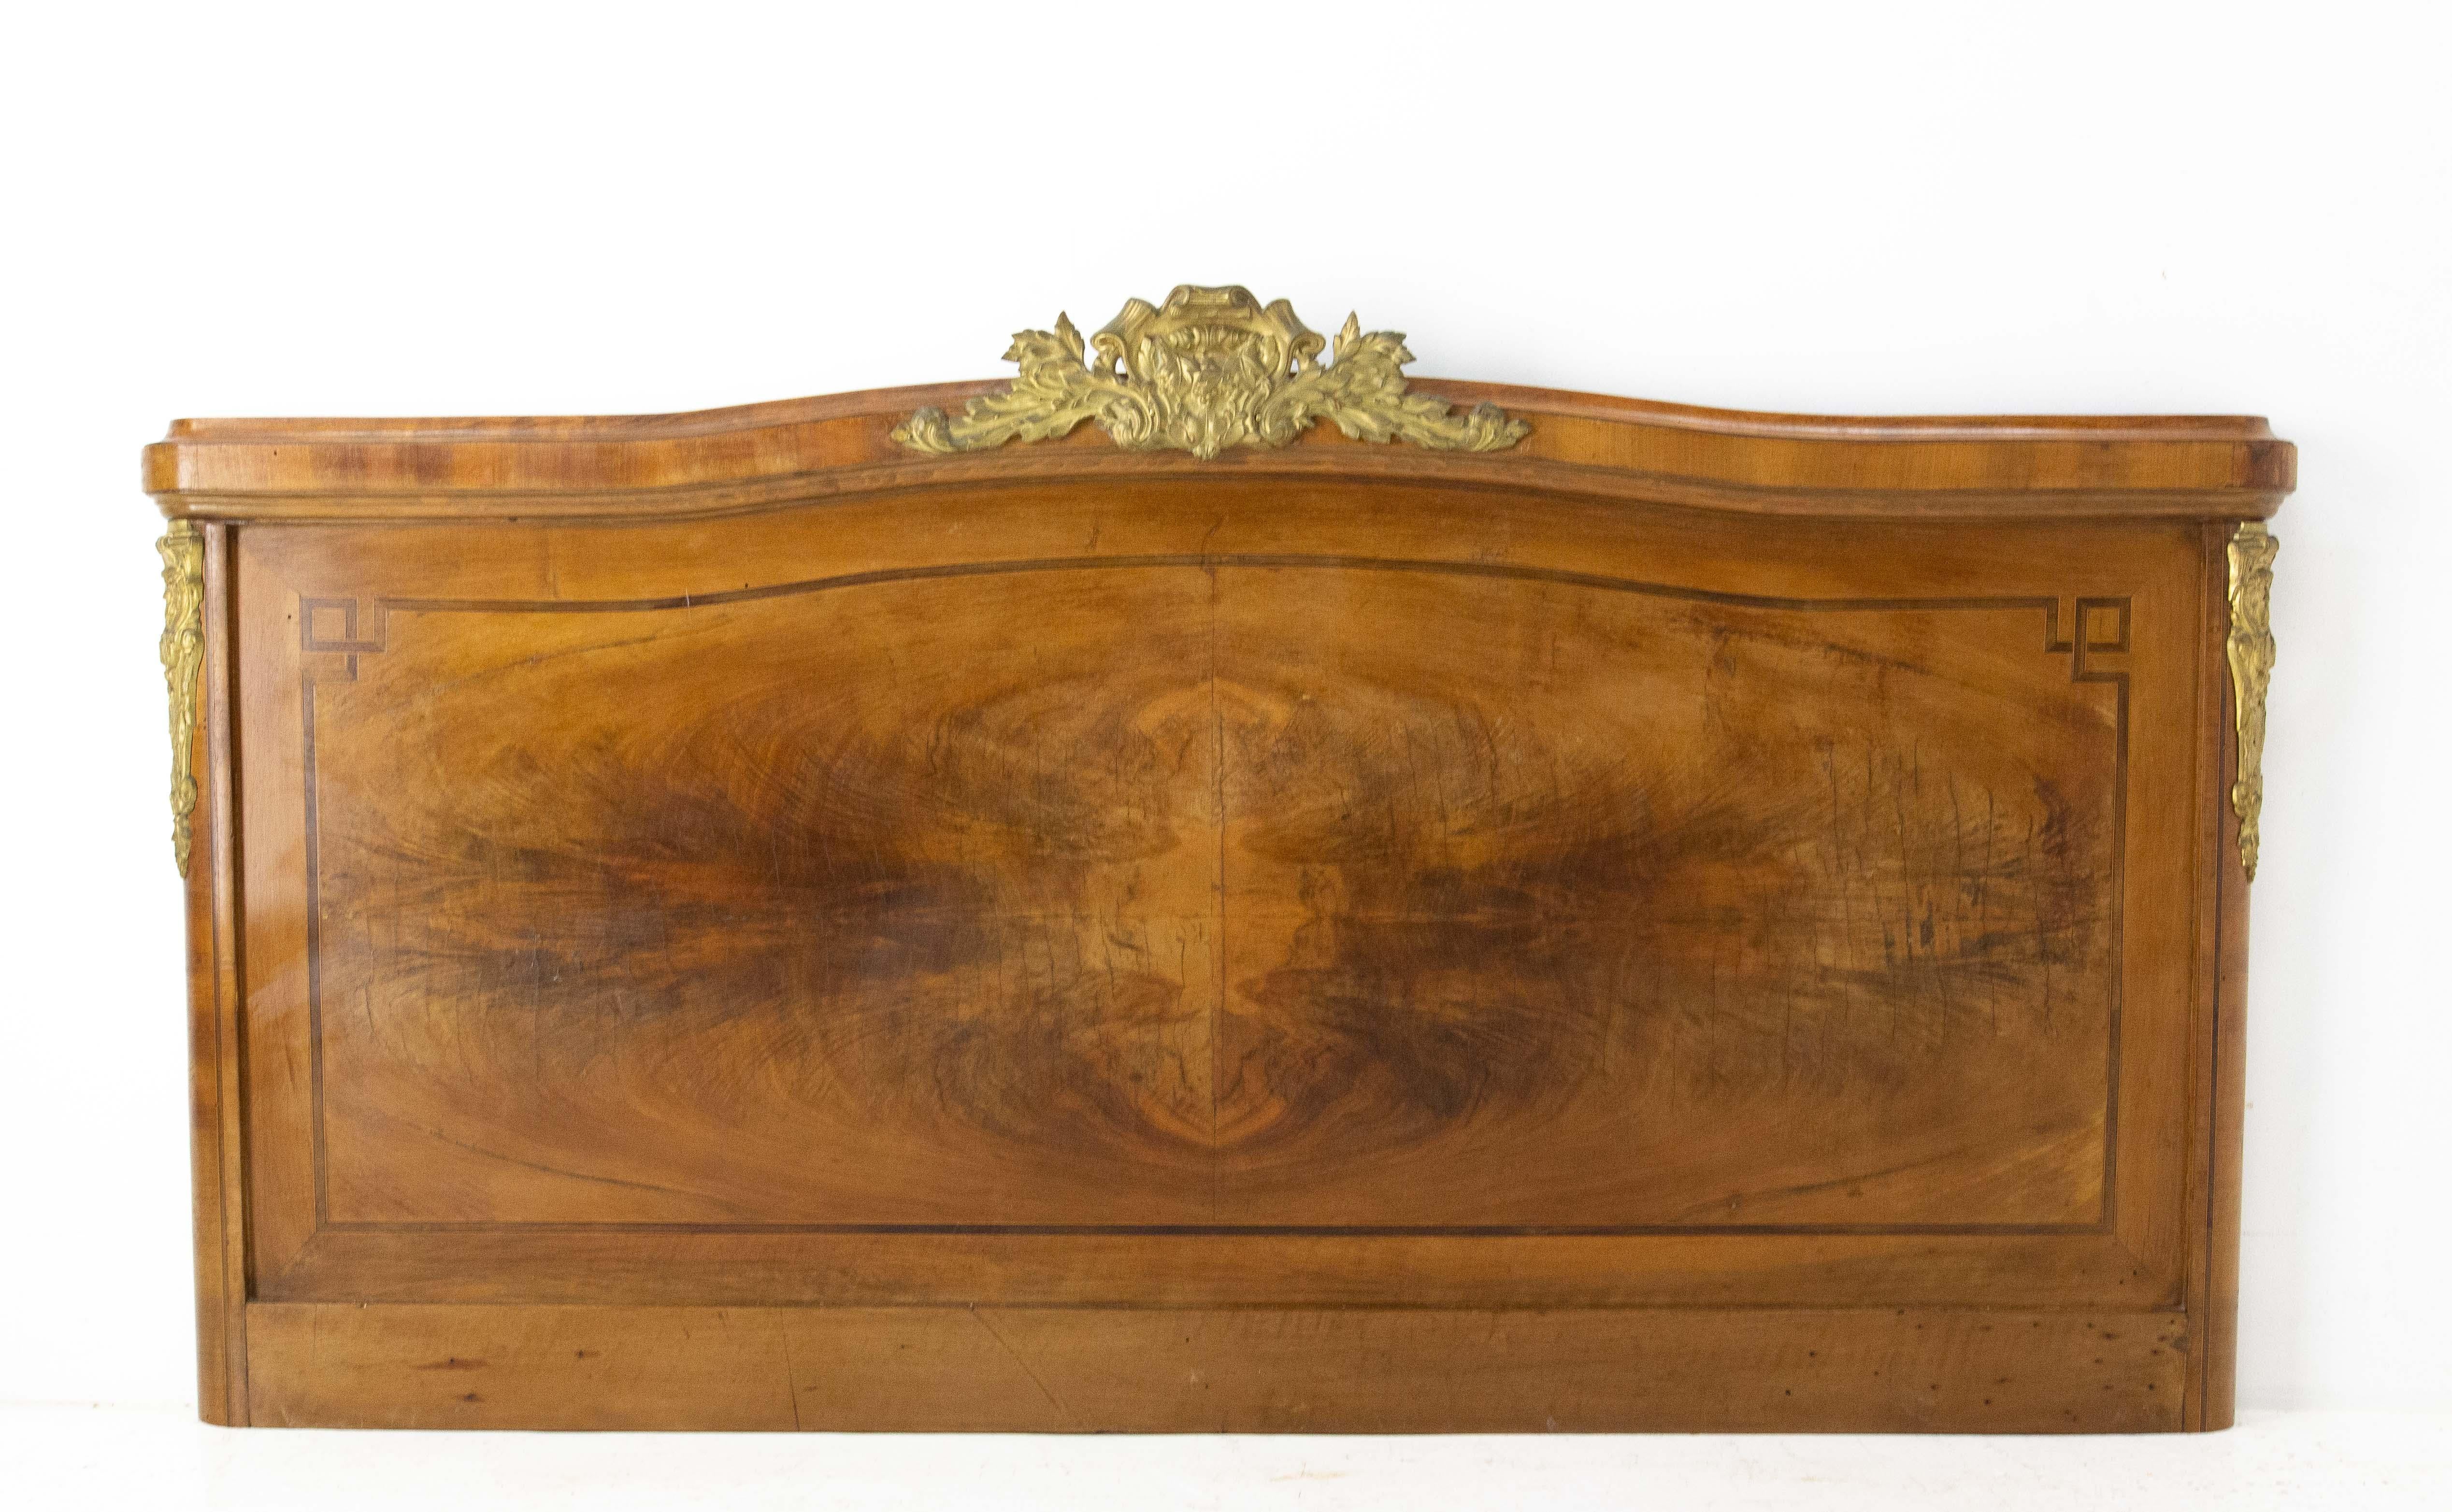 Walnut headboard Louis XV style
French, early 20th century
Headboard to be attached to the wall
Vegetal motifs on the brass and geometrical motifs on the wood.
Width without moldings: 57.09 in. (145 cm)
Good antique condition with minor signs